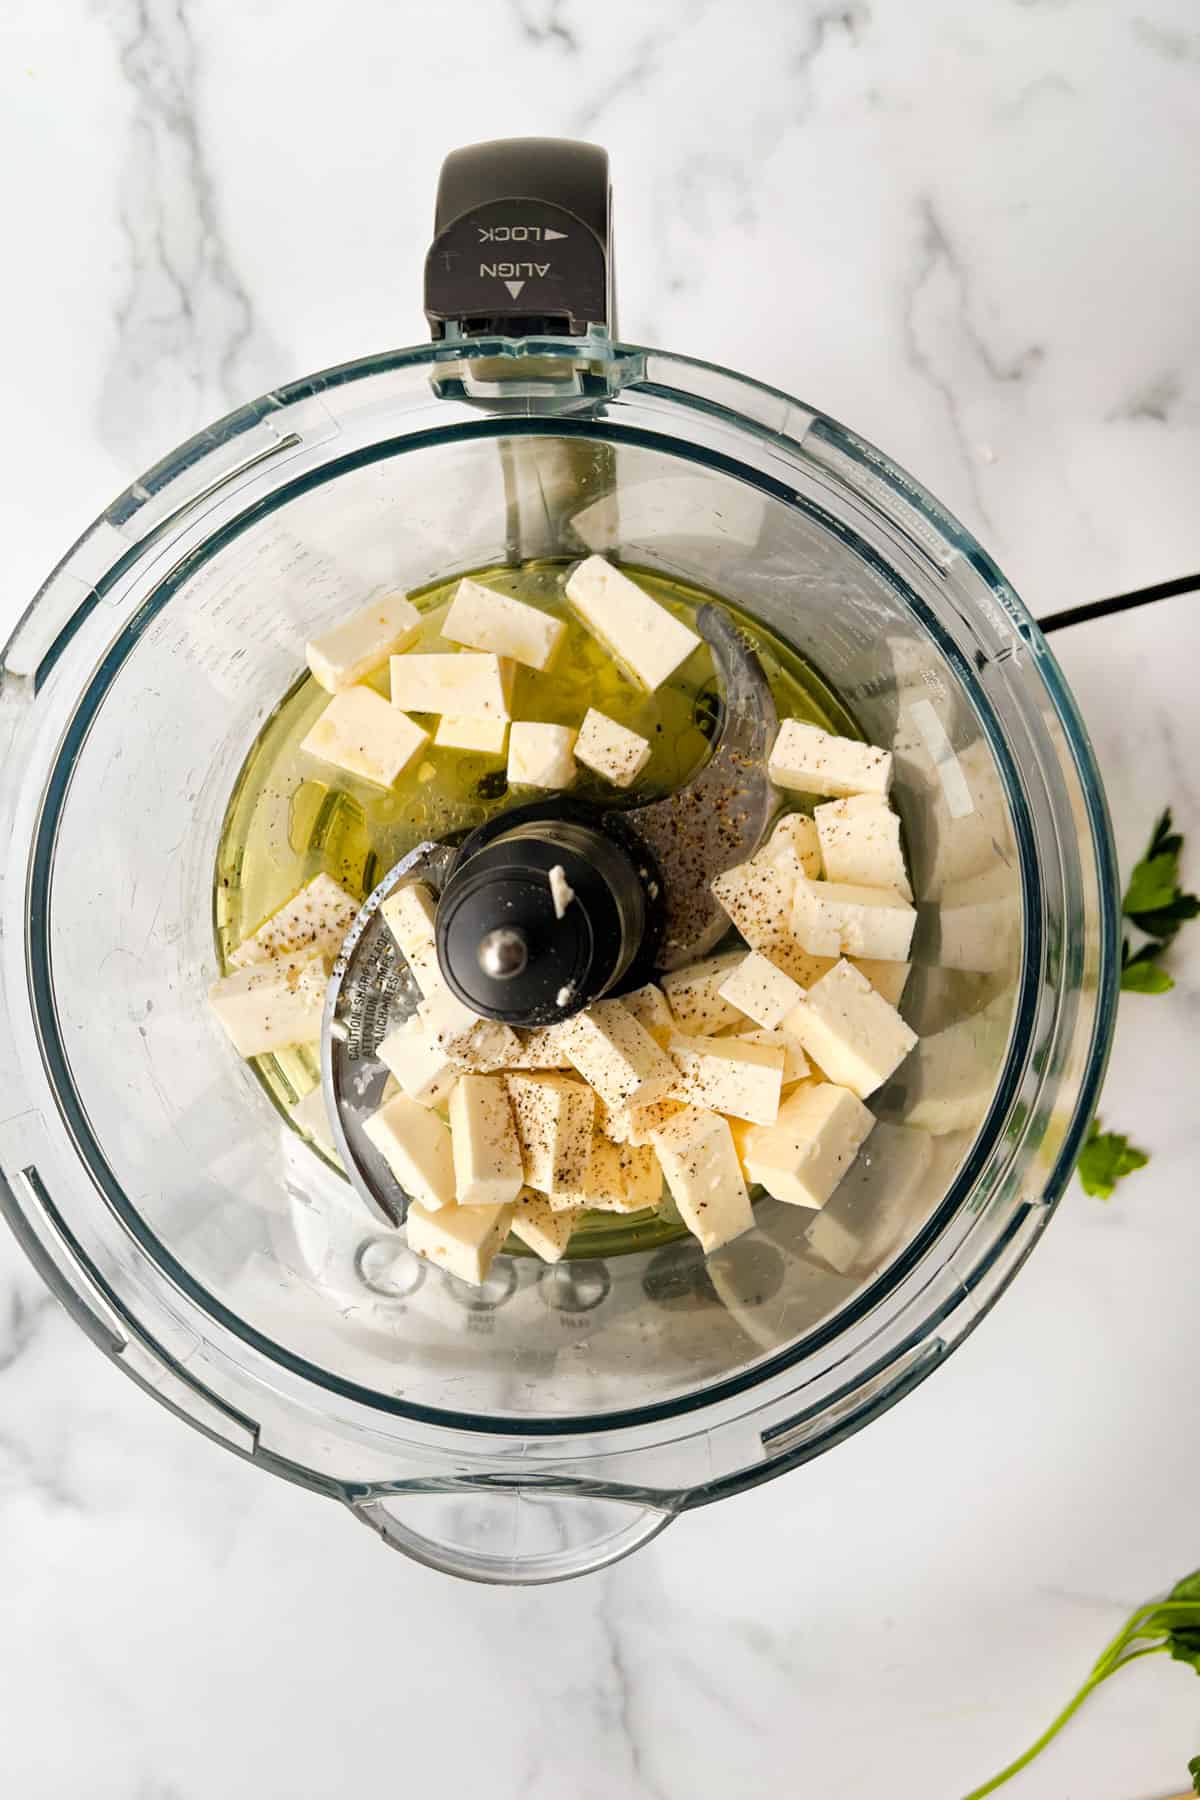 Cubes of feta, olive oil, lemon juice, salt and pepper in the bowl of a food process.